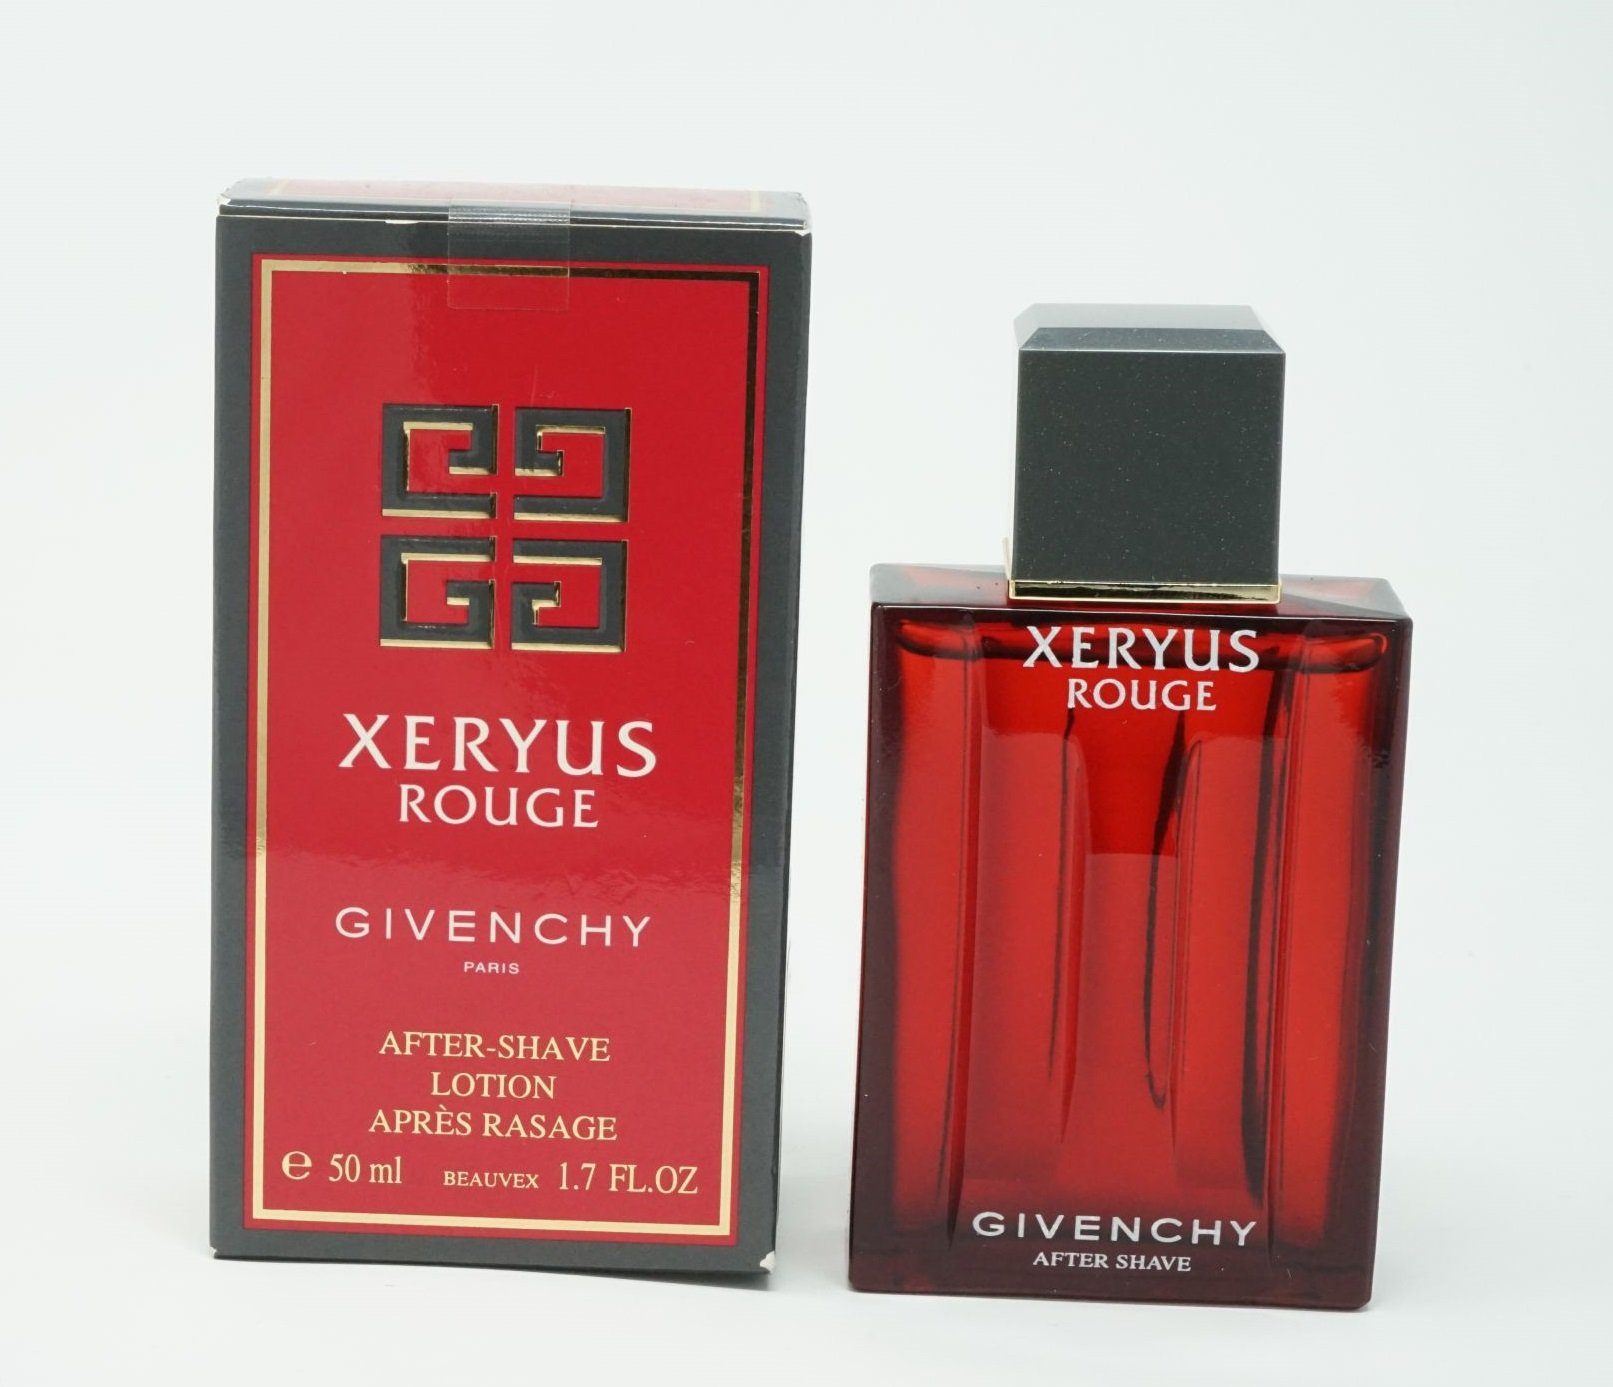 GIVENCHY After ml Lotion Rouge Shave After Shave Xeryus 50 Lotion Givenchy